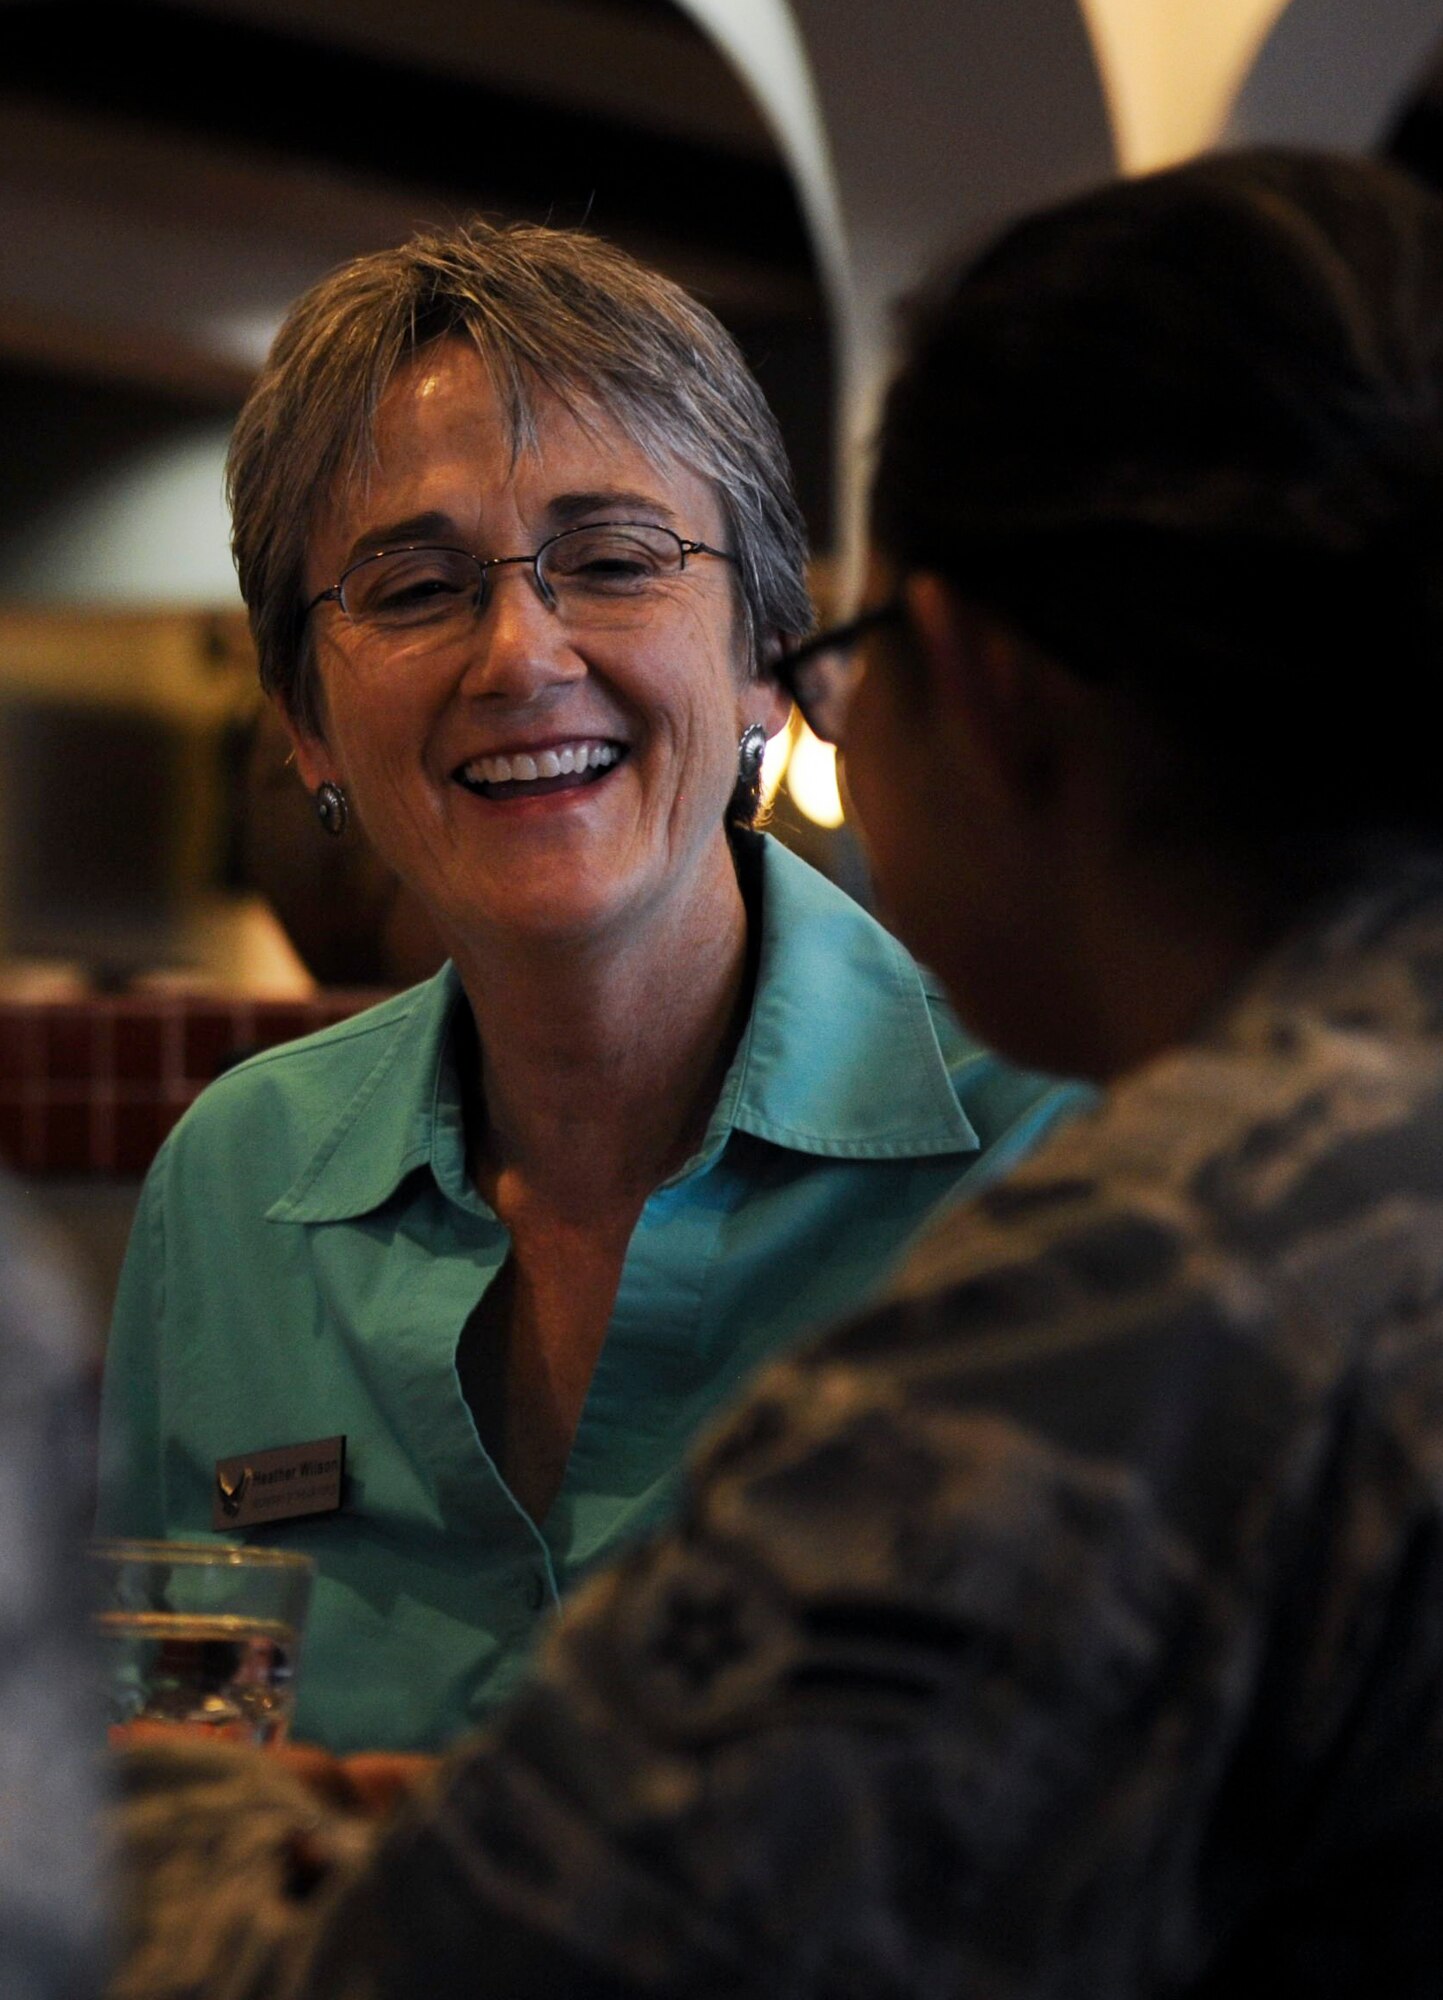 Air Force Secretary Heather Wilson laughs during a lunch with Airmen at the Crosswinds Dining Facility on Nellis Air Force Base, Nevada, July 18, 2017. Wilson was impressed with the skills in which in which Airmen execute the responsibilities the Air Force places on their shoulders. (U.S. Air Force photo by Senior Airman Kevin Tanenbaum)